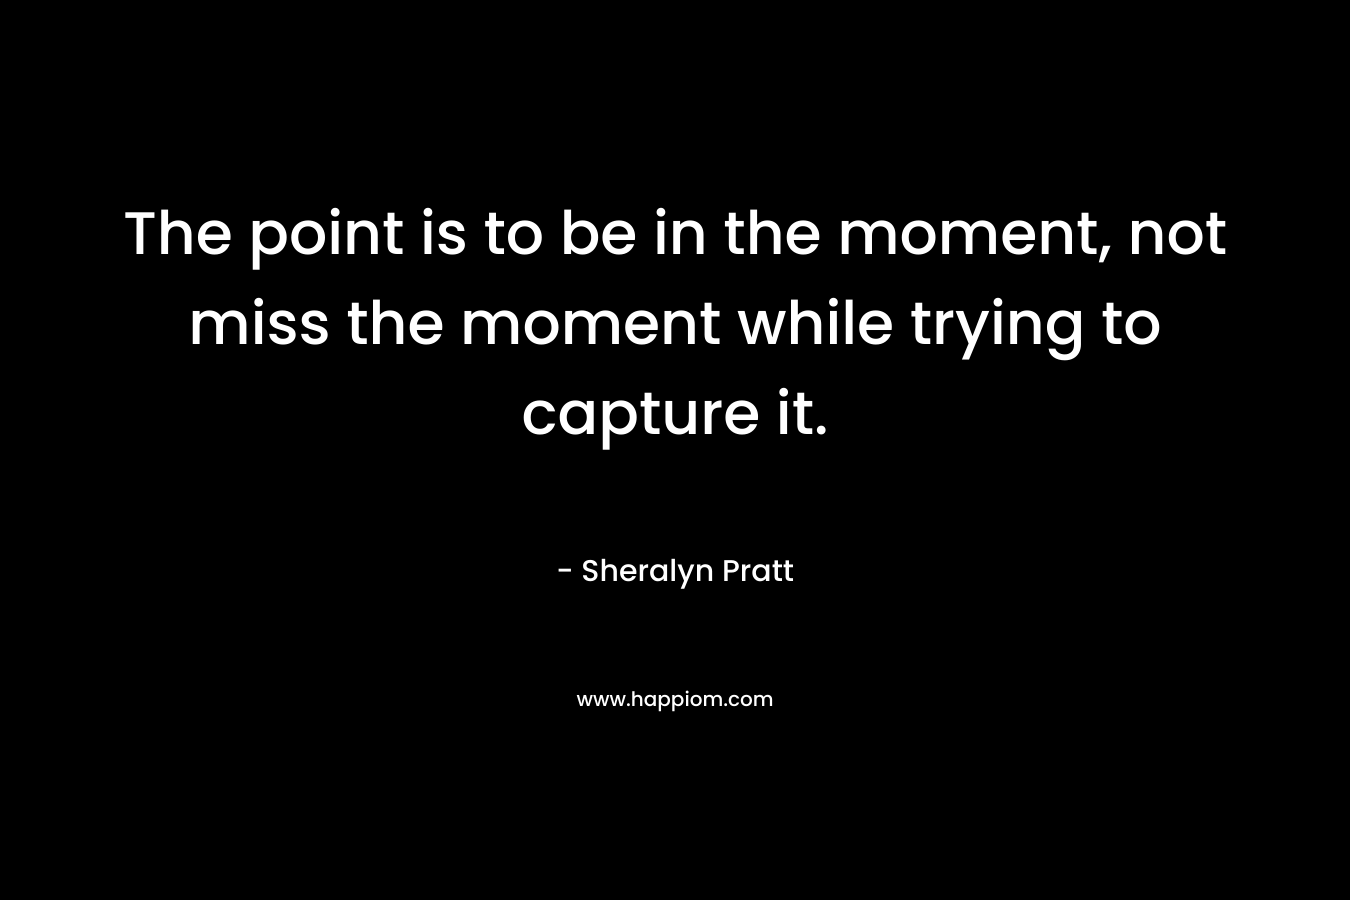 The point is to be in the moment, not miss the moment while trying to capture it.